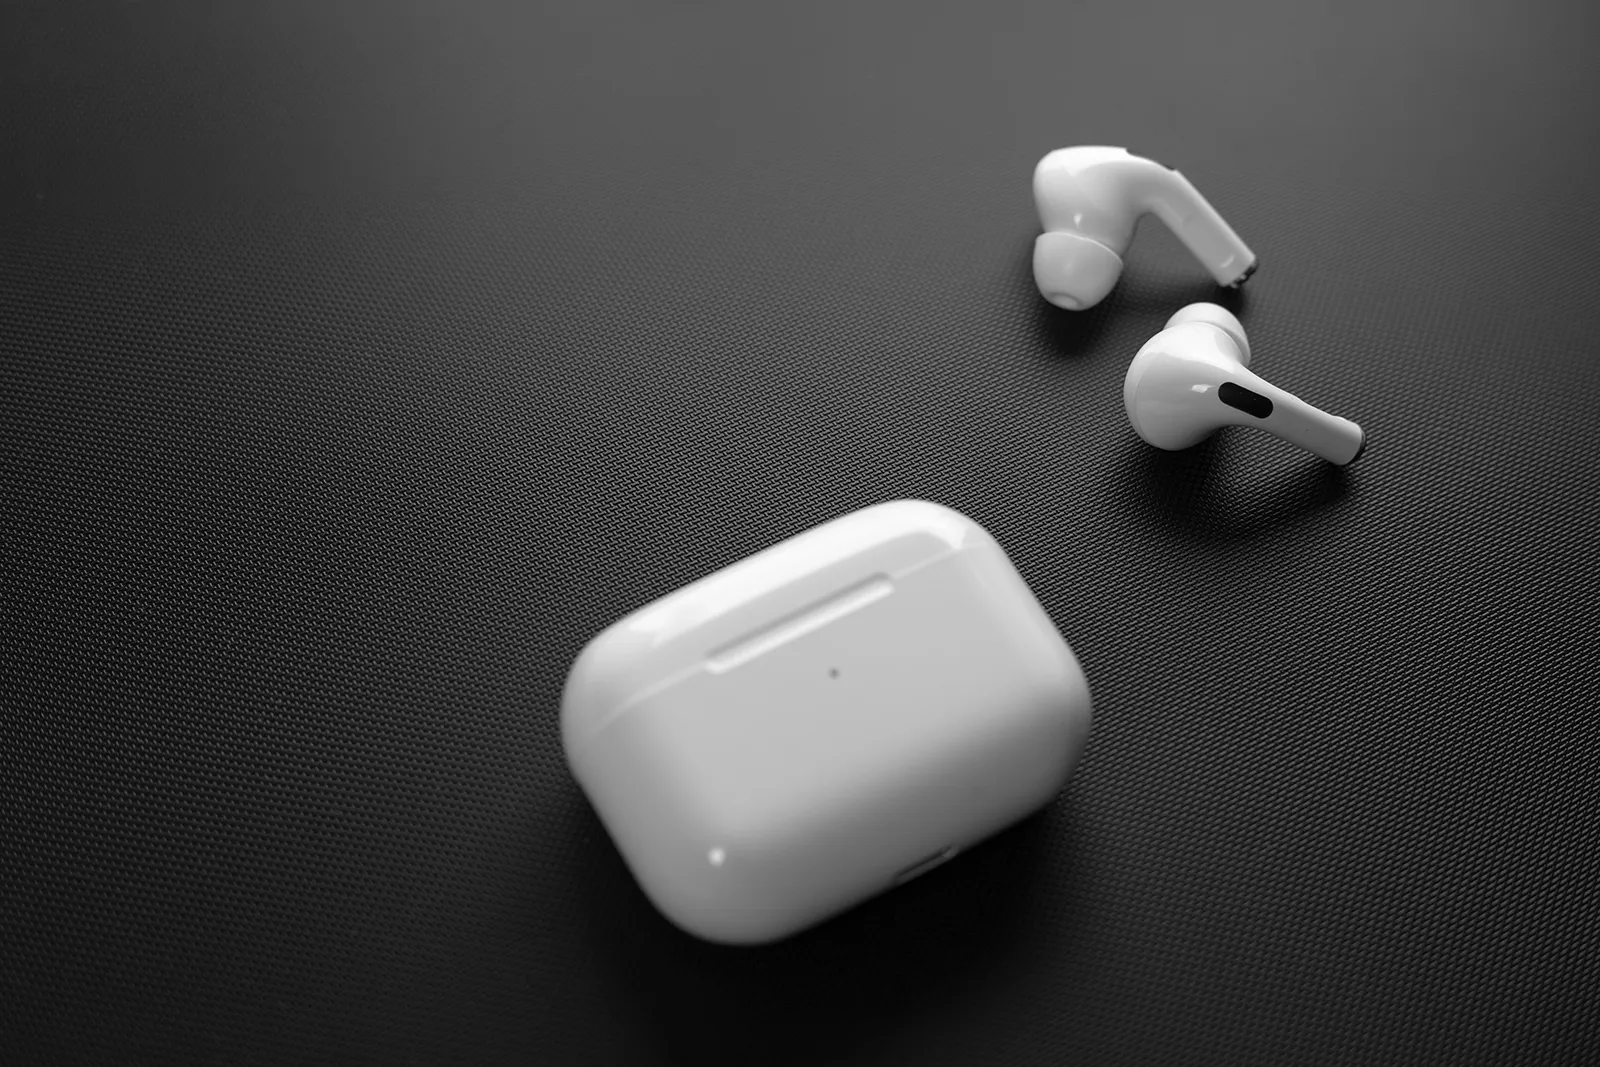 Repairing AirPods: Can They Be Fixed or Restored? AirPods Price in Pakistan